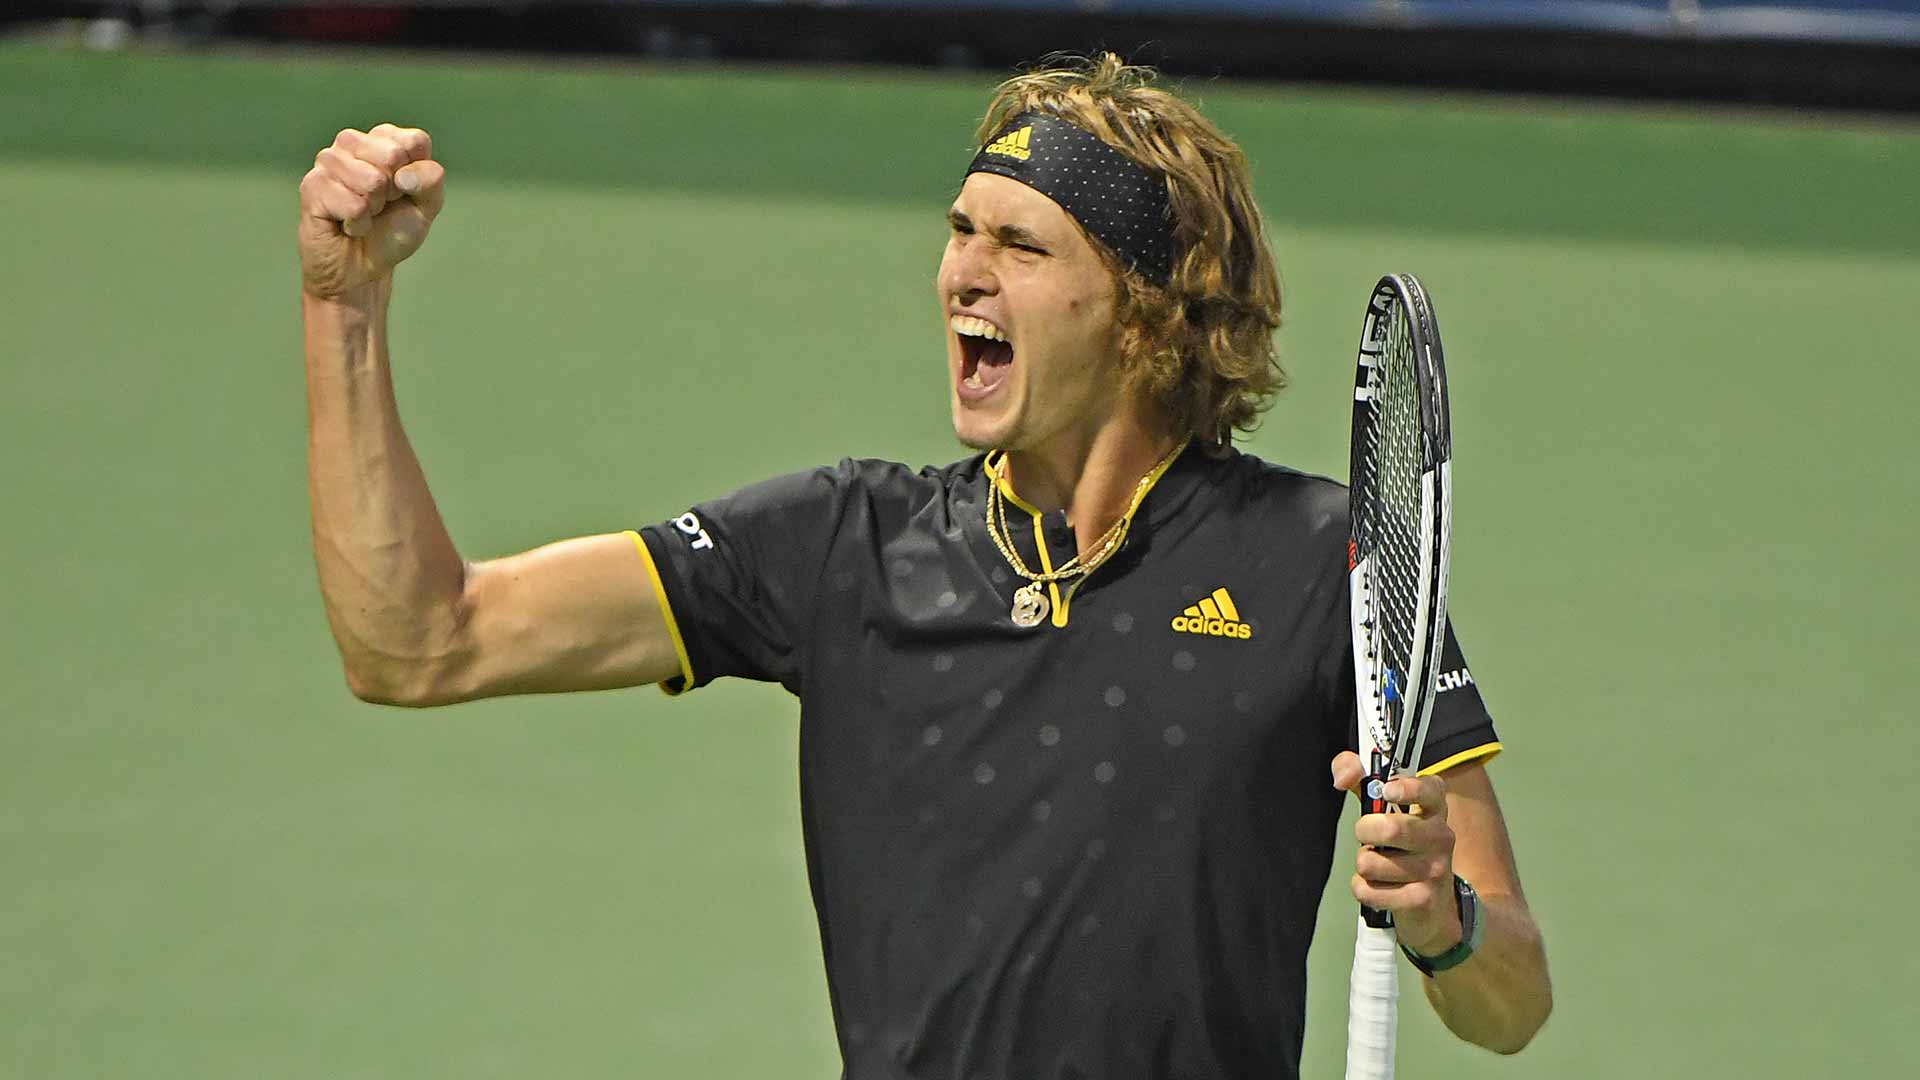 The Stranger By law Tightly Zverev saves three match points to down Gasquet in Montreal | ATP Tour |  Tennis